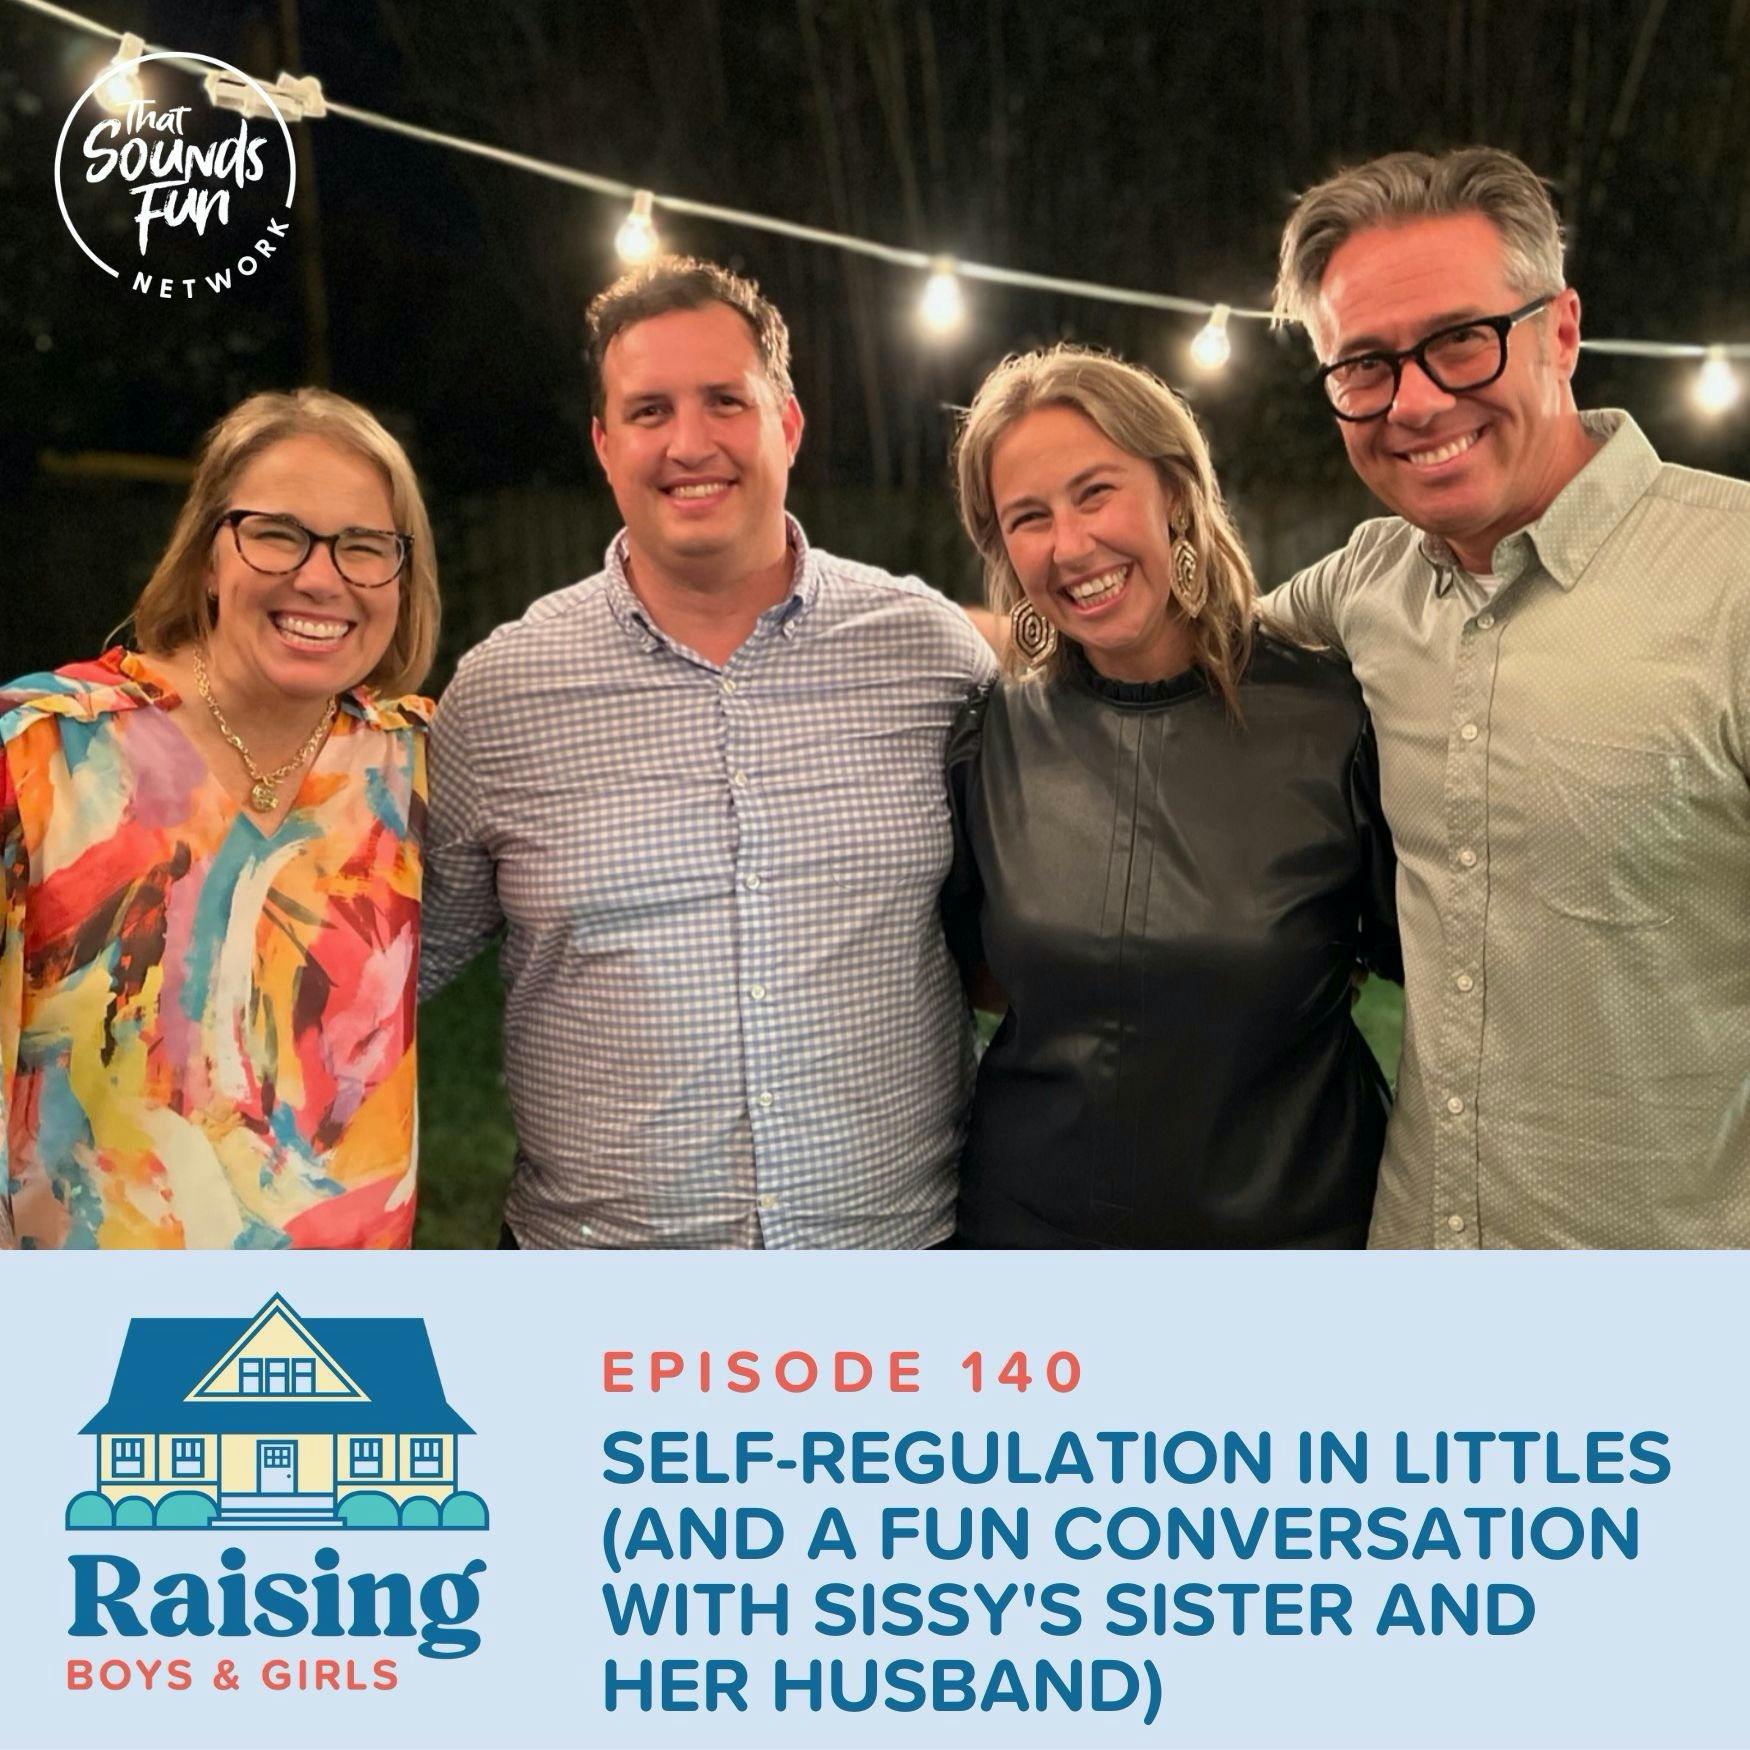 Episode 140: Self-Regulation in Littles (and a Fun Conversation with Sissy's Sister and Her Husband)